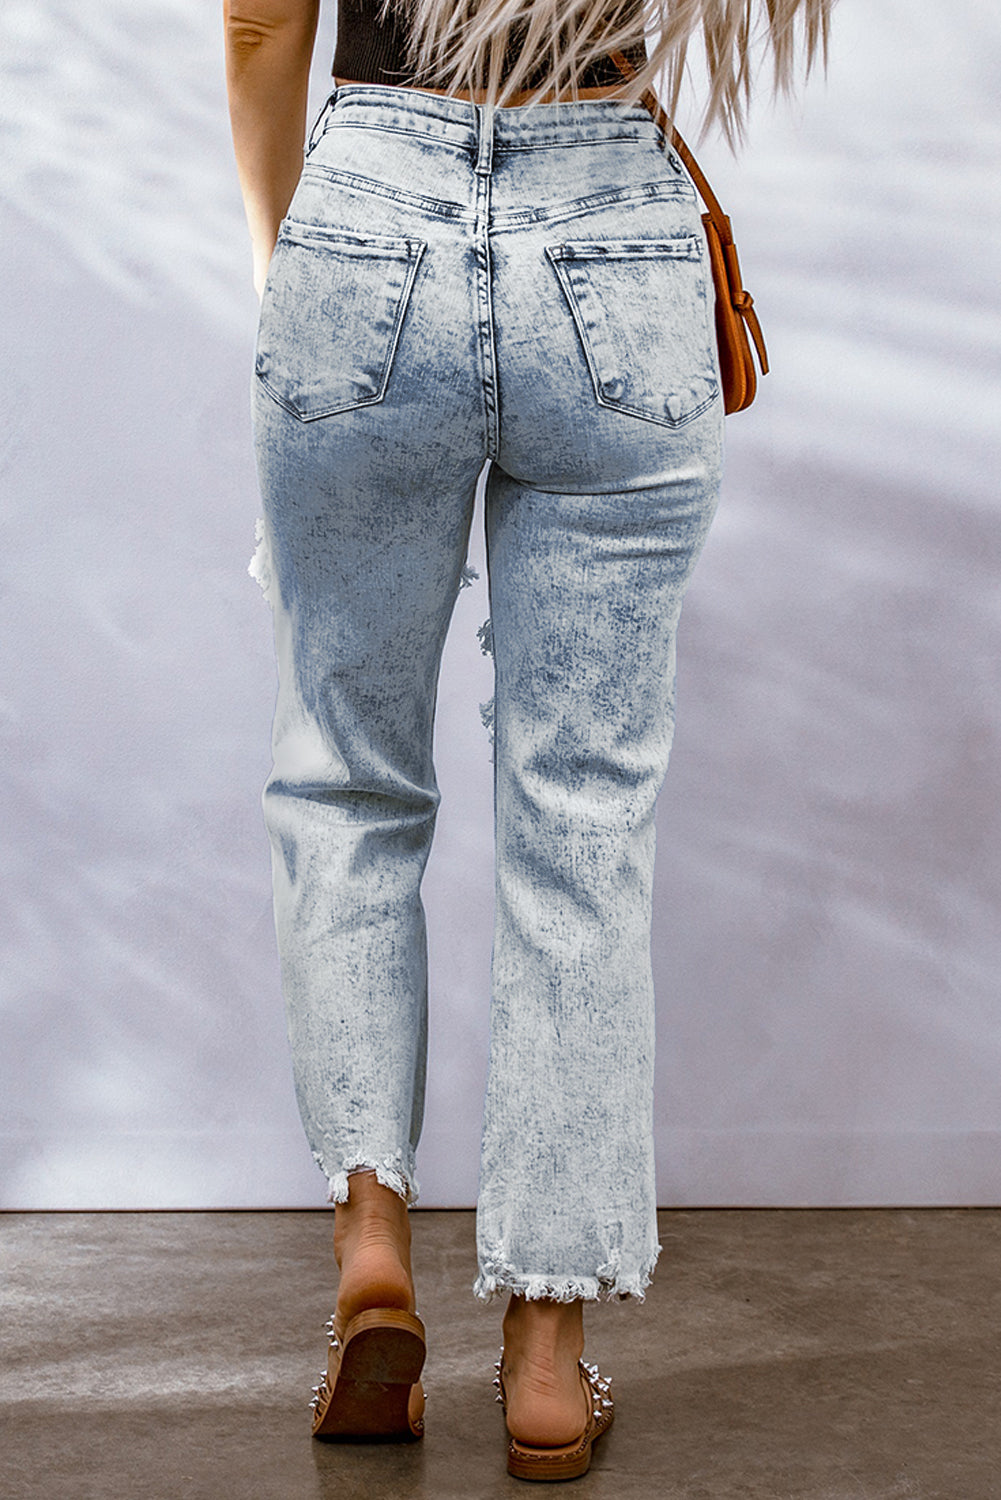 Sky Blue Hollow-out Light Washed Ripped Boyfriend Jeans